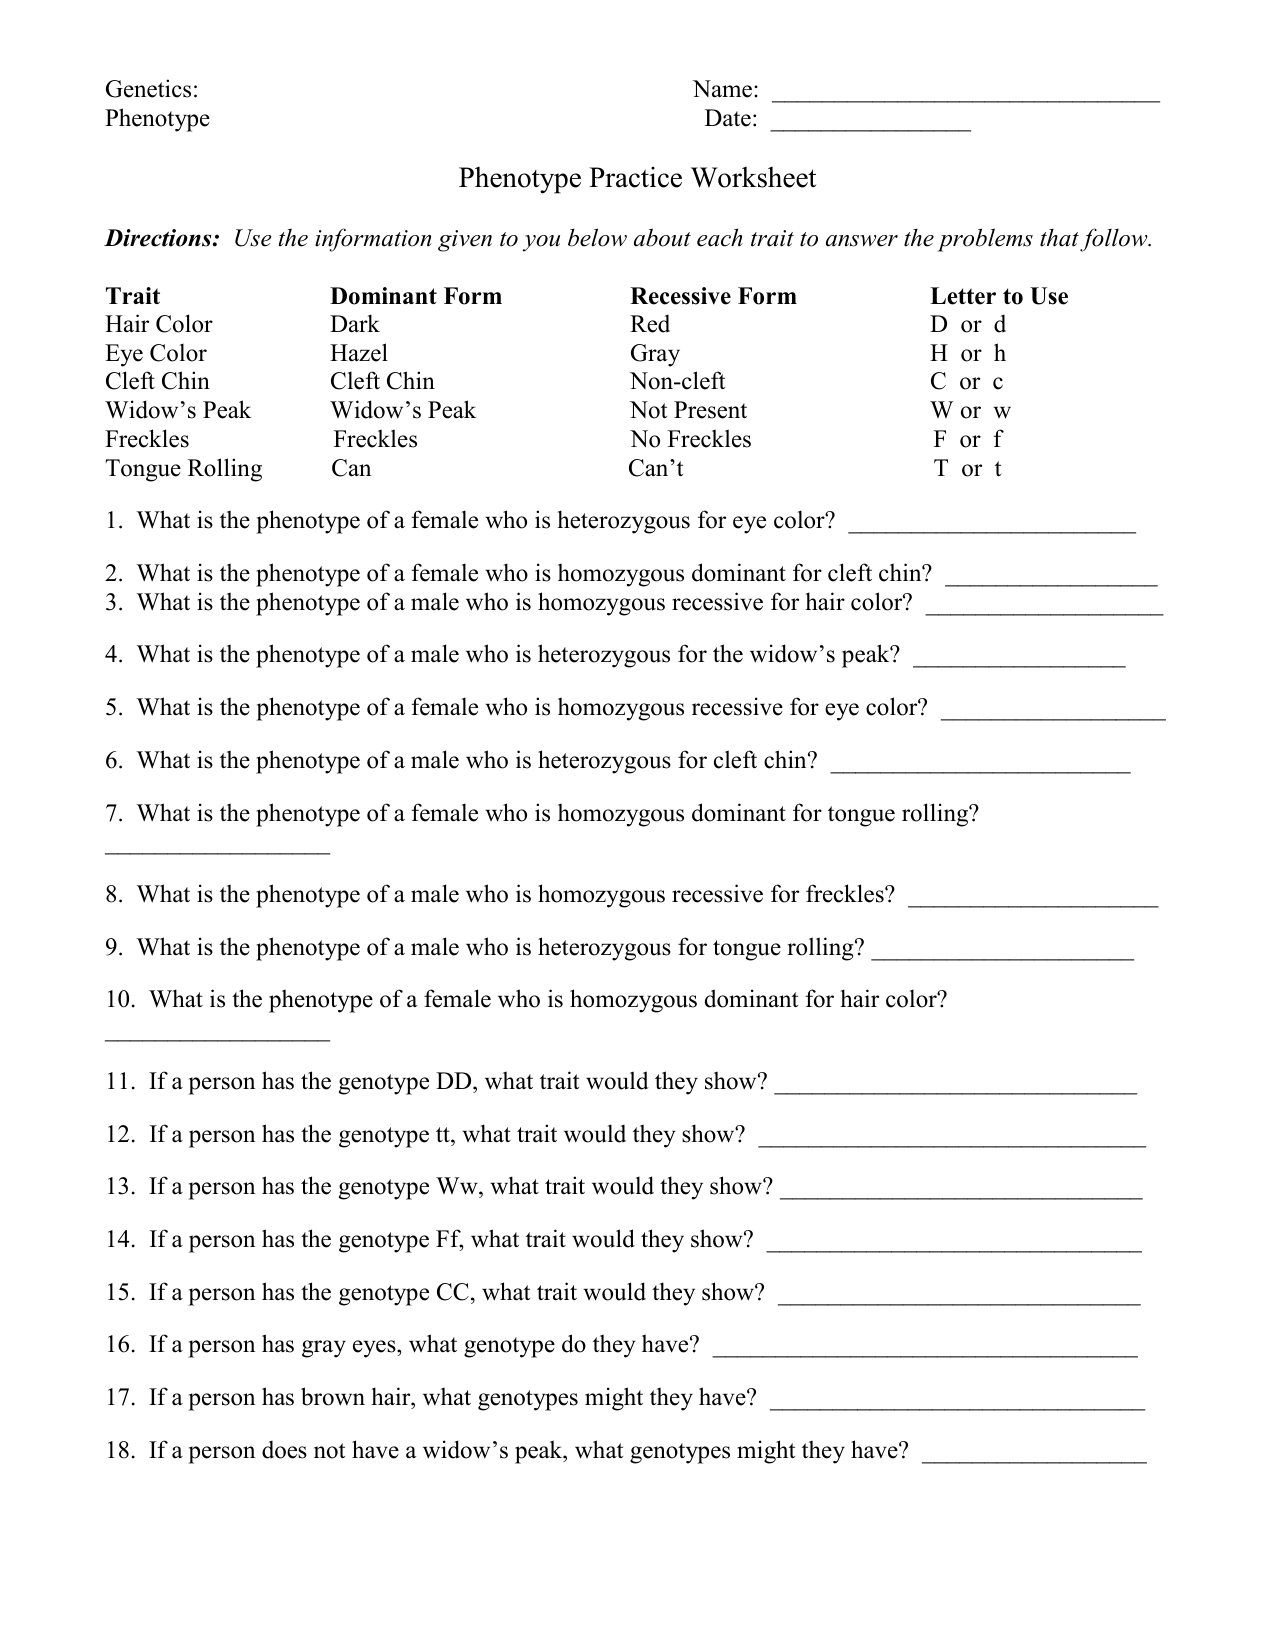 Genotypes And Phenotypes Worksheet Answers - Promotiontablecovers Within Genotypes And Phenotypes Worksheet Answers